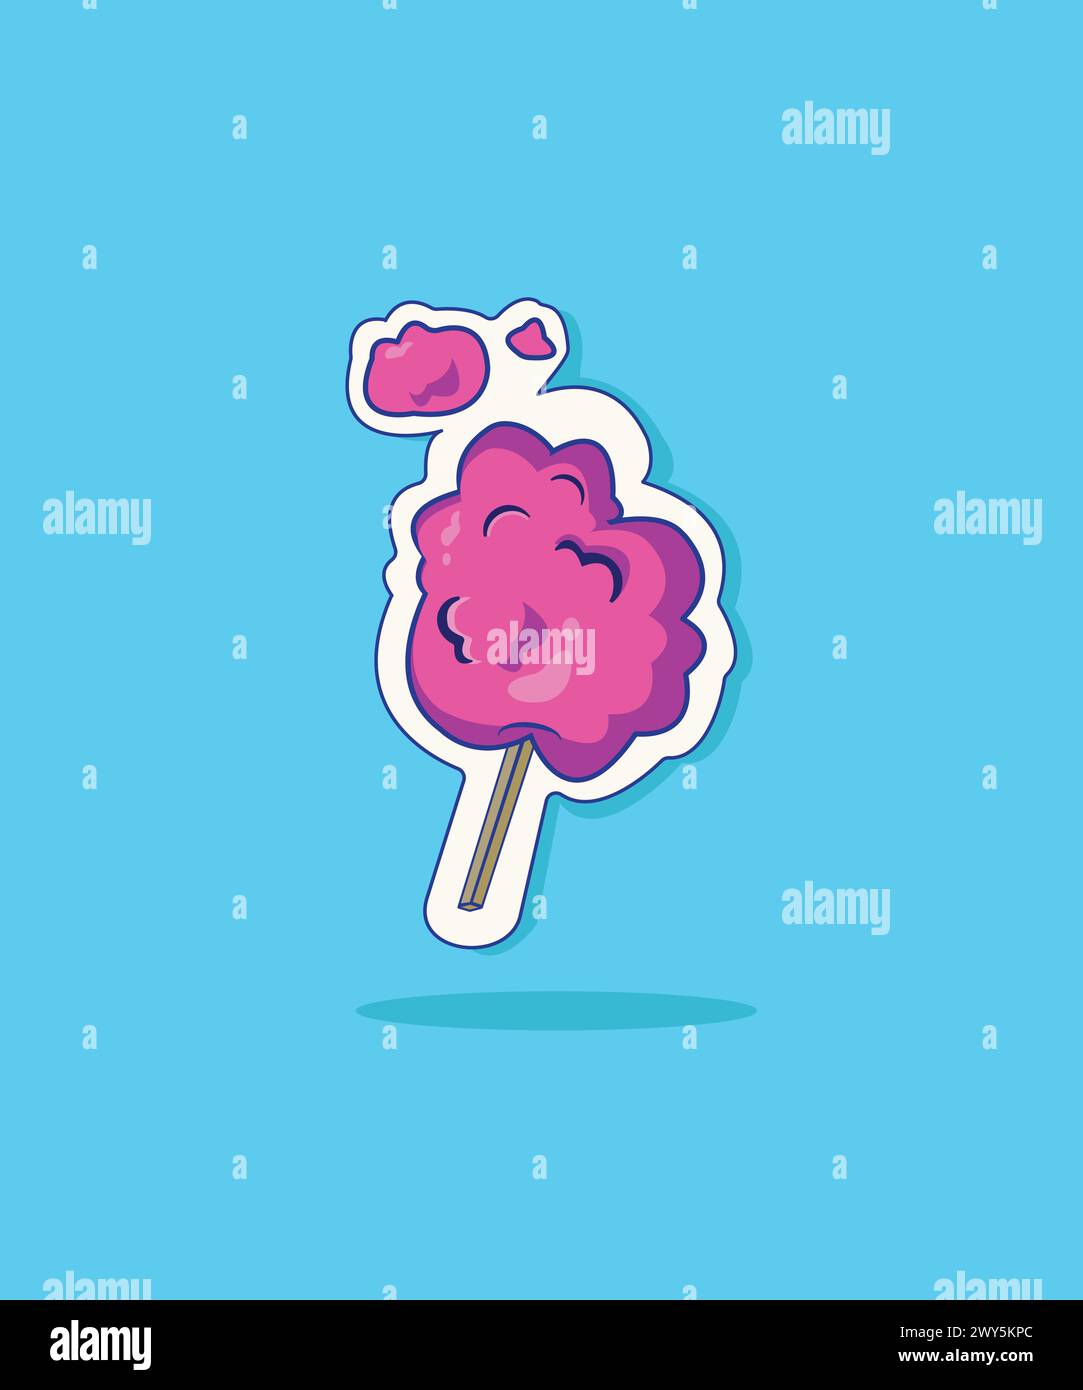 Pink Sweet Cotton Candy Vector Illustration Isolated Design with Flat Cartoon Style Stock Vector